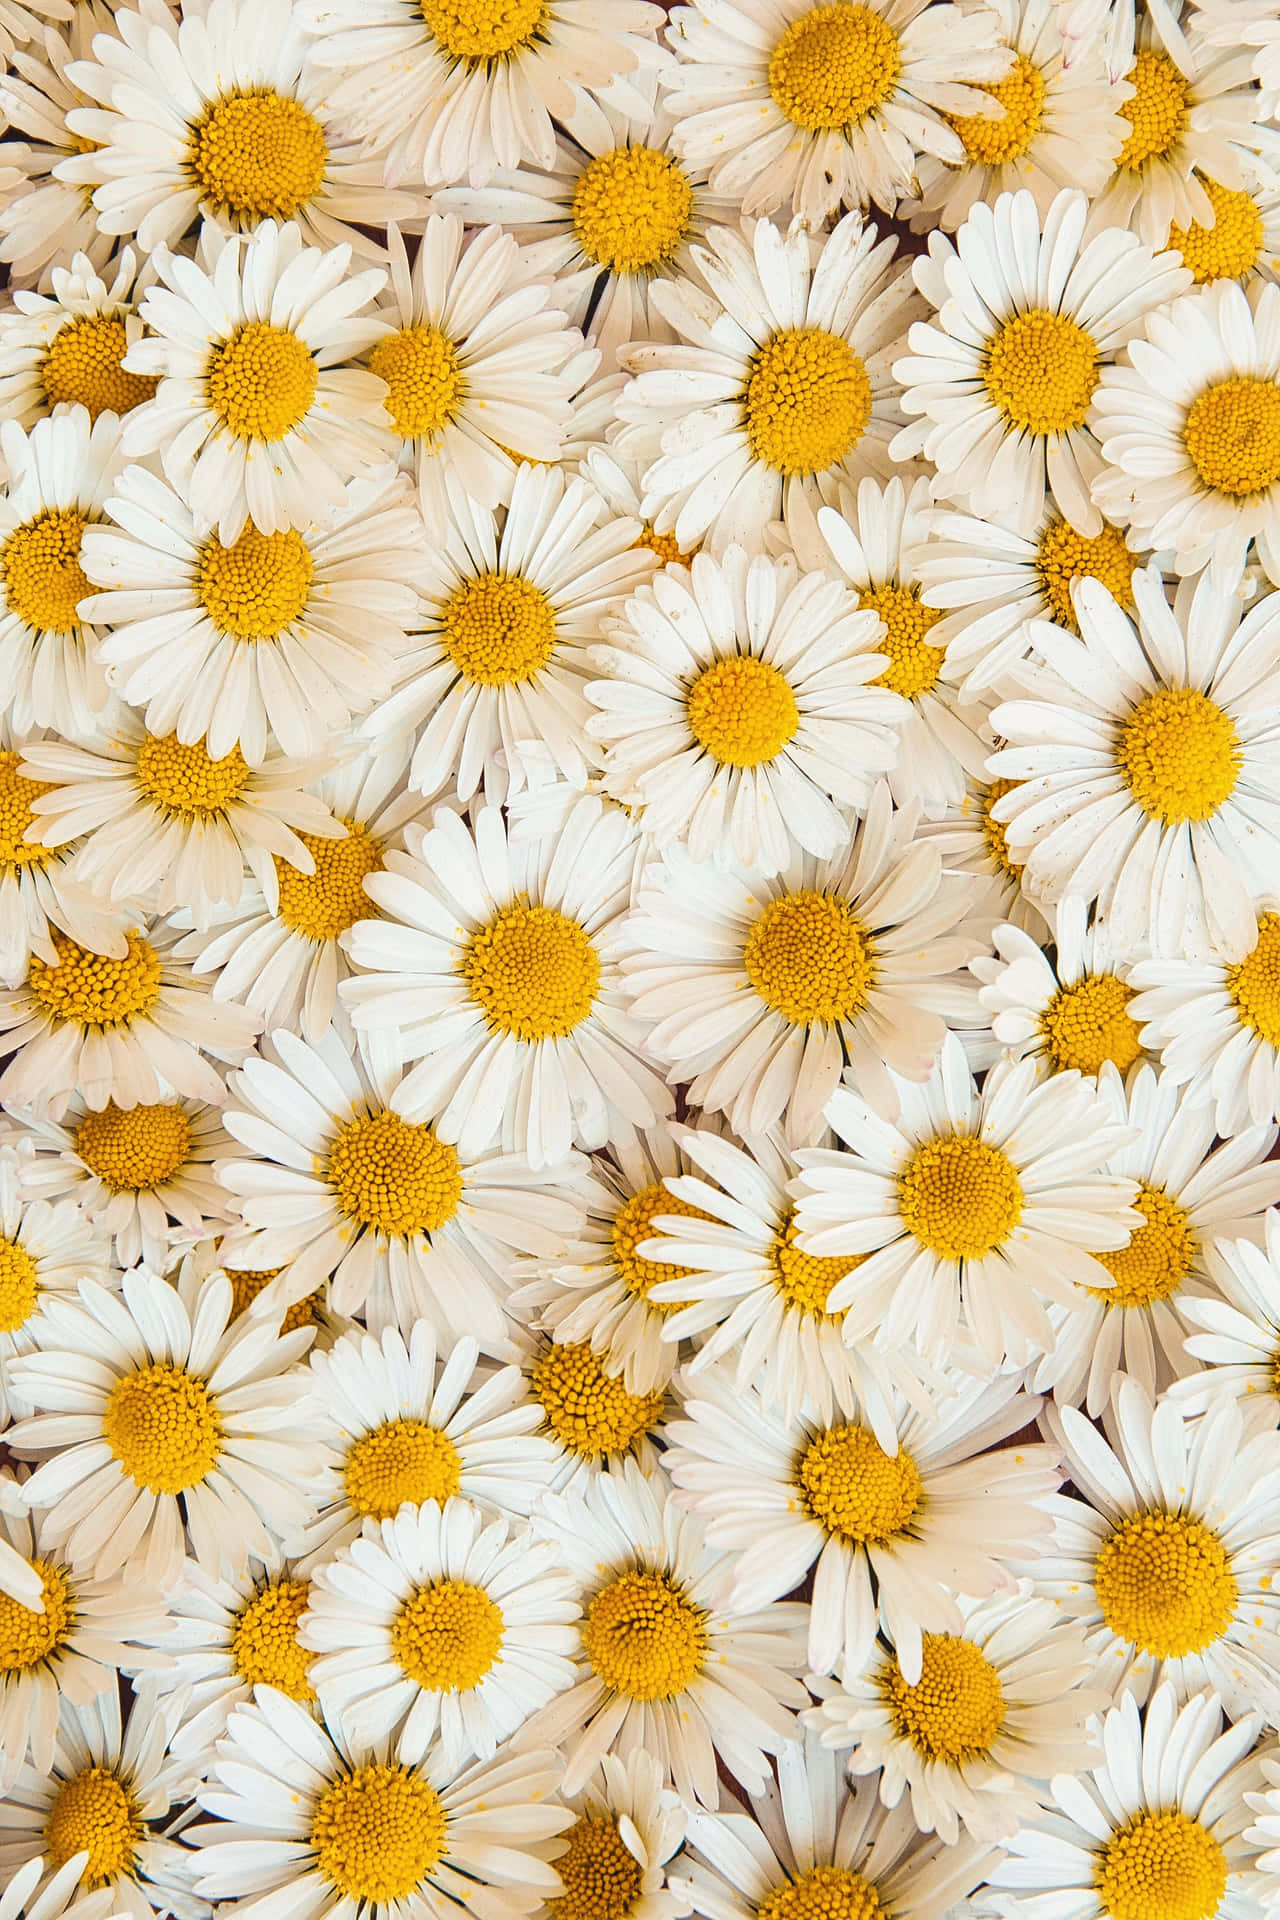 Top 999+ Flowers Background Full HD, 4K✅Free to Use